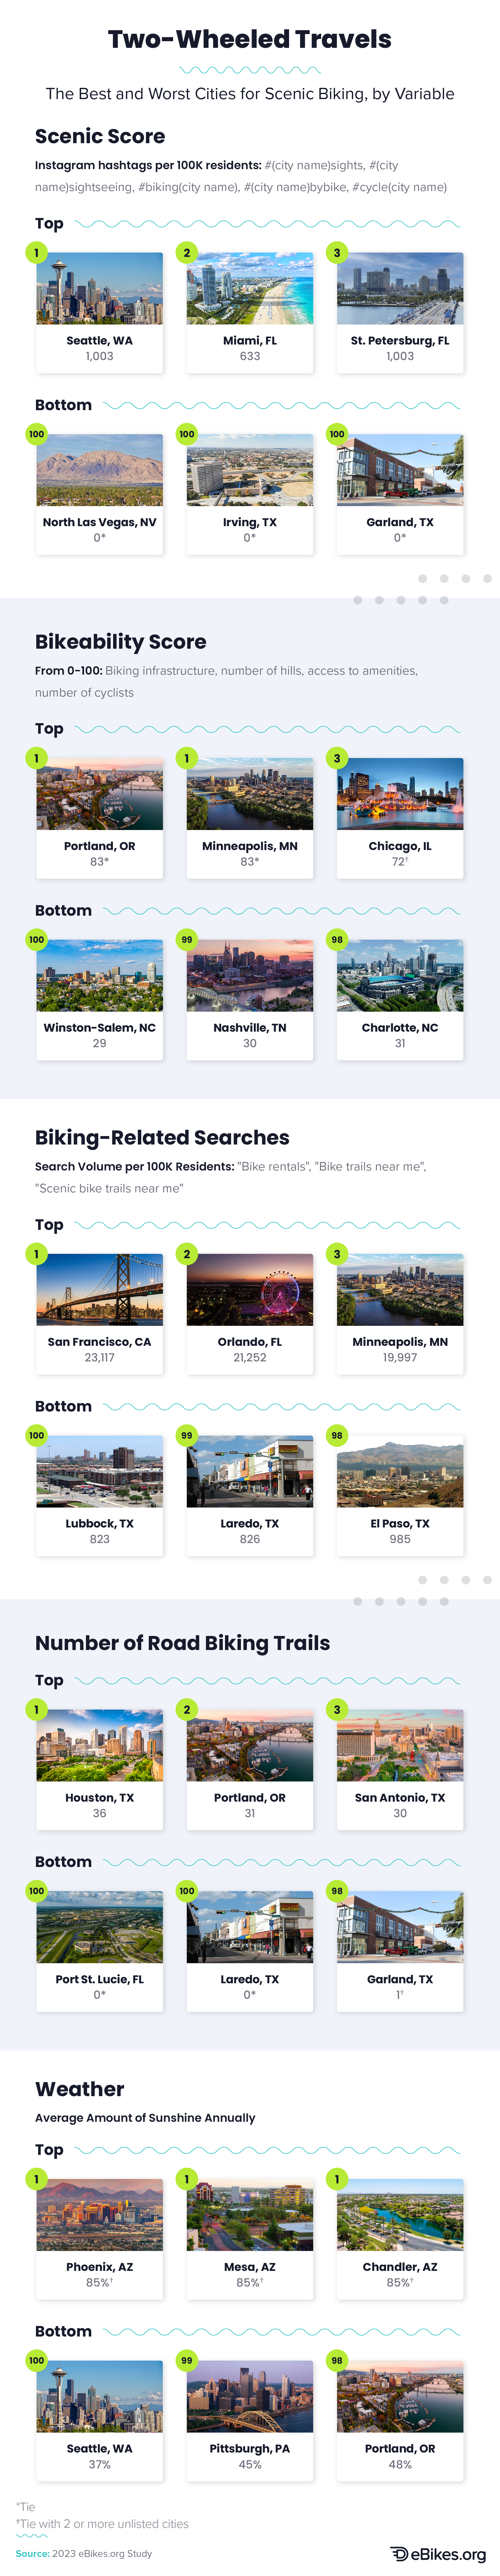 Infographic of the best and worst cities for scenic biking according to different variables, such as scenery, bikeability, biking related searches, number of road biking trails, and weather.